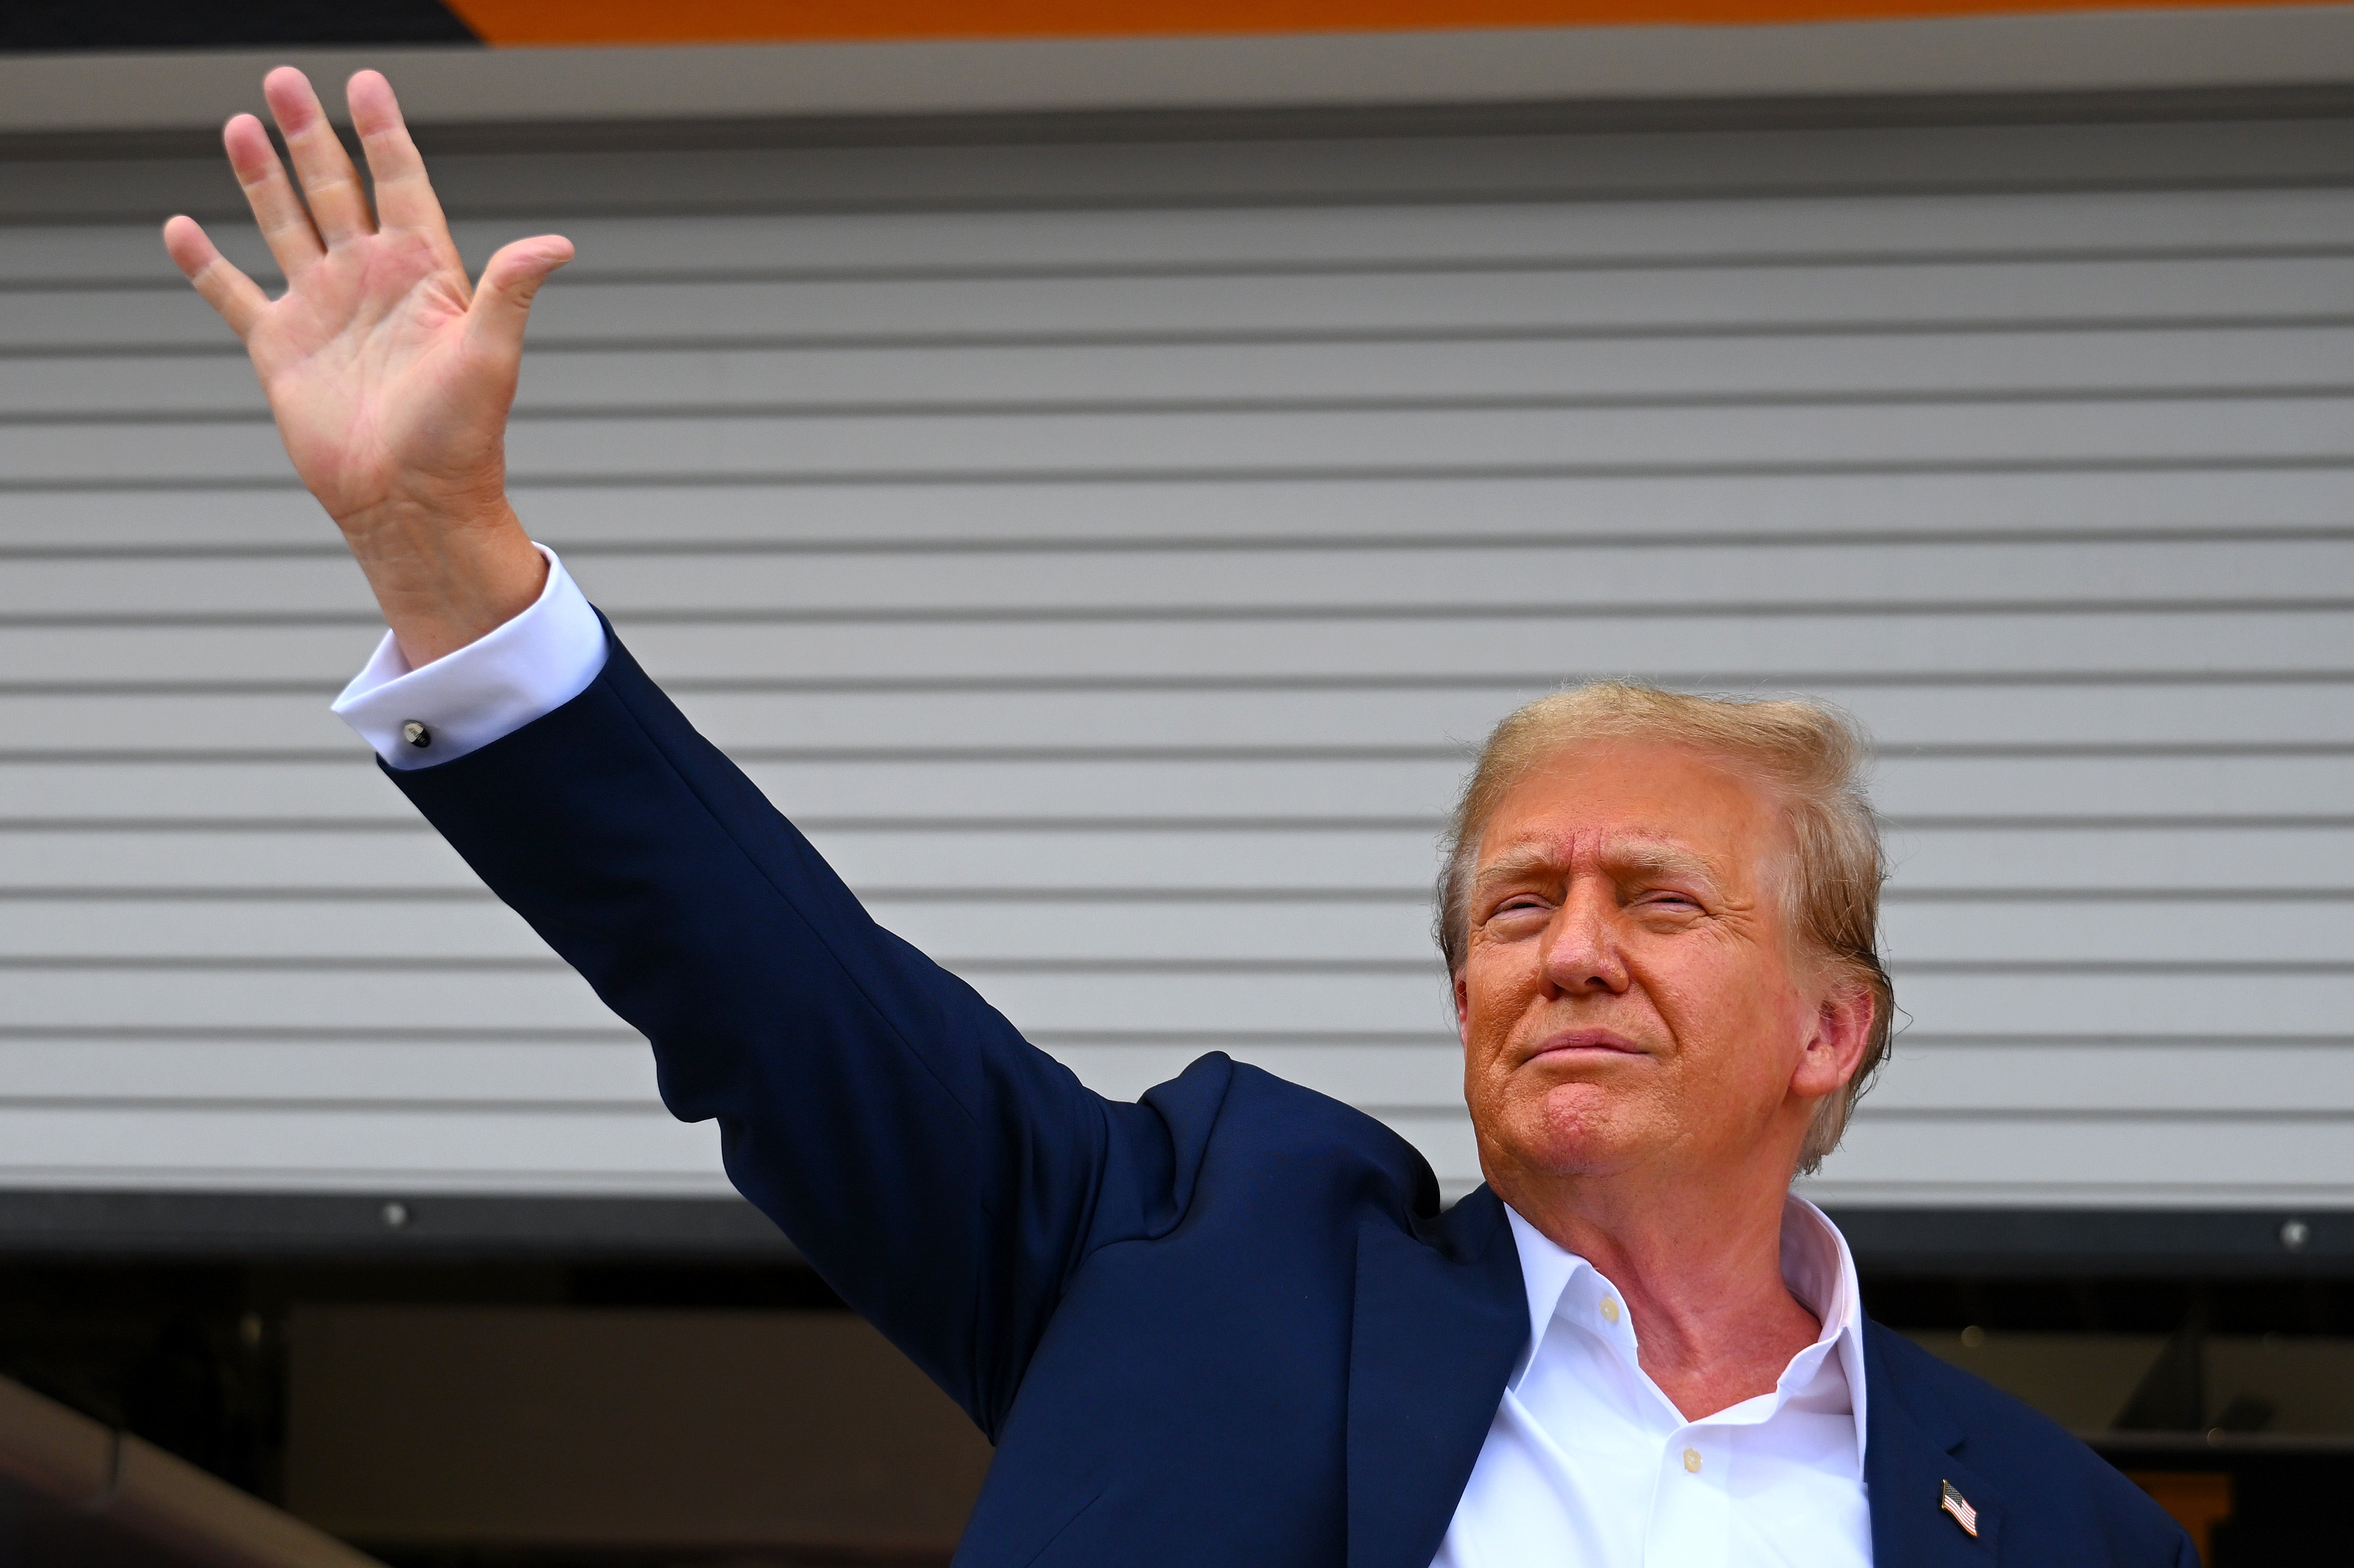 Trump waves to the crowds at the F1 Miami Grand Prix